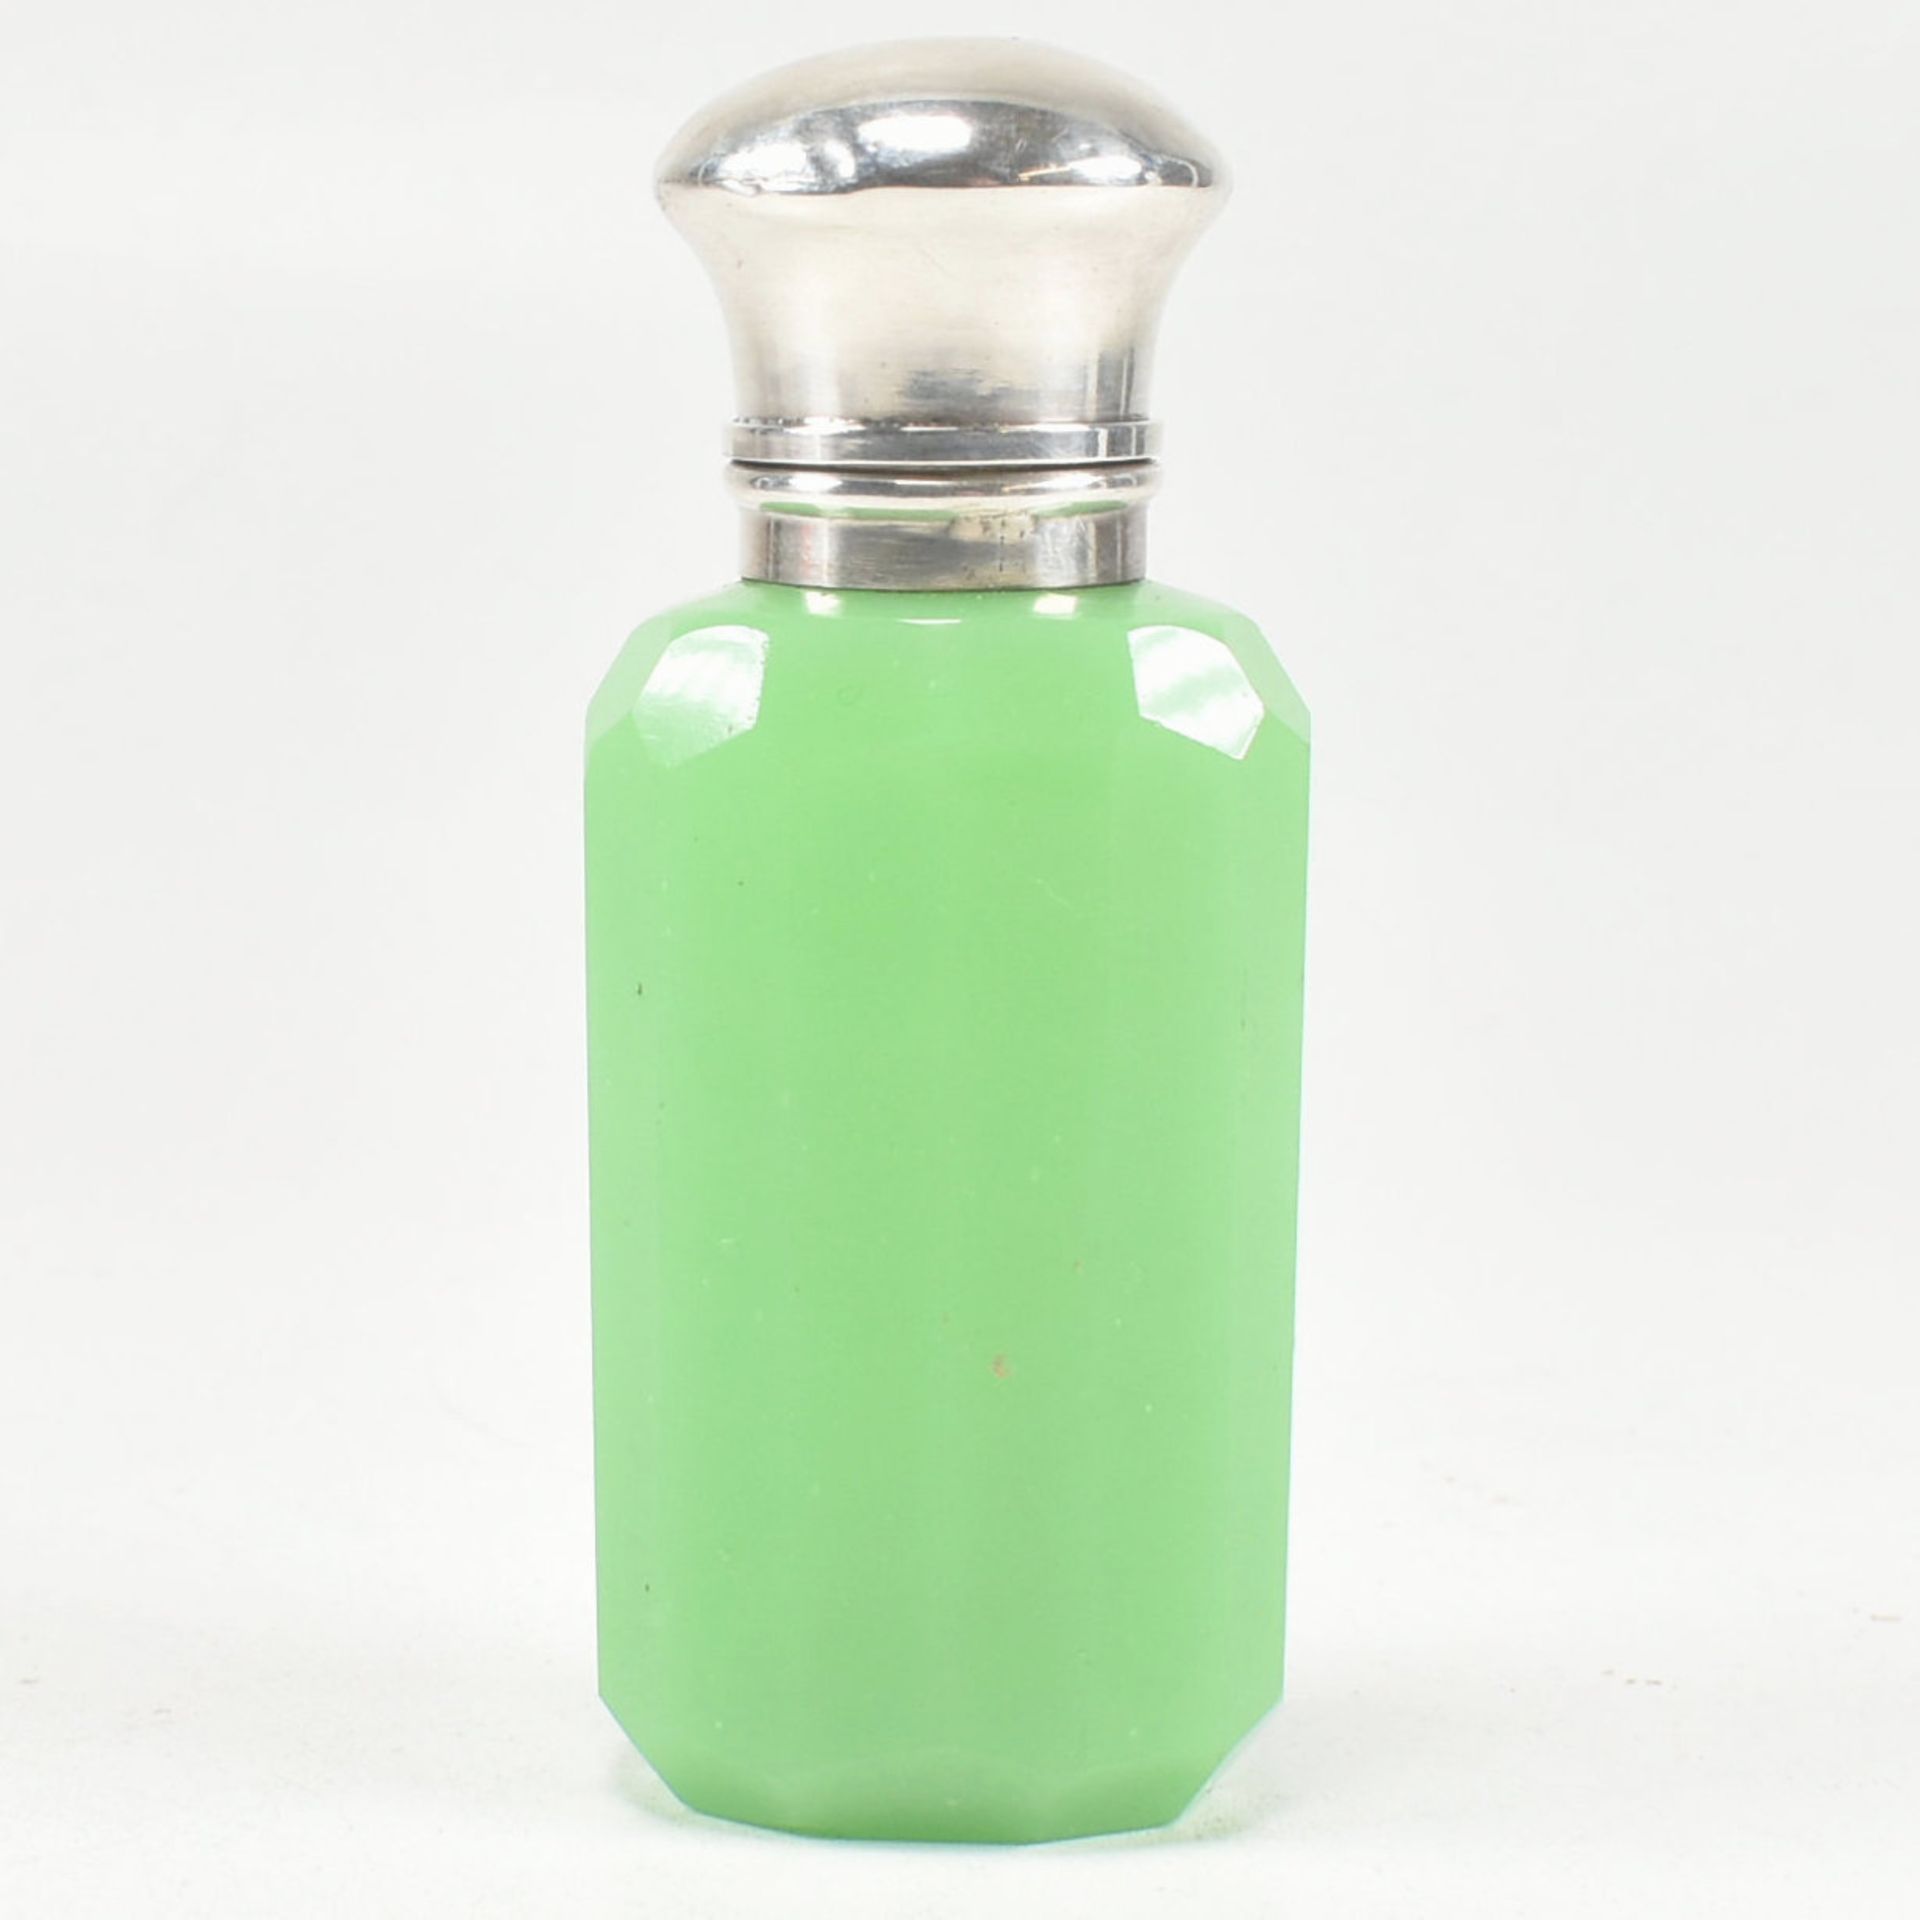 EARLY 20TH CENTURY WHITE METAL & URANIUM GLASS SCENT BOTTLE